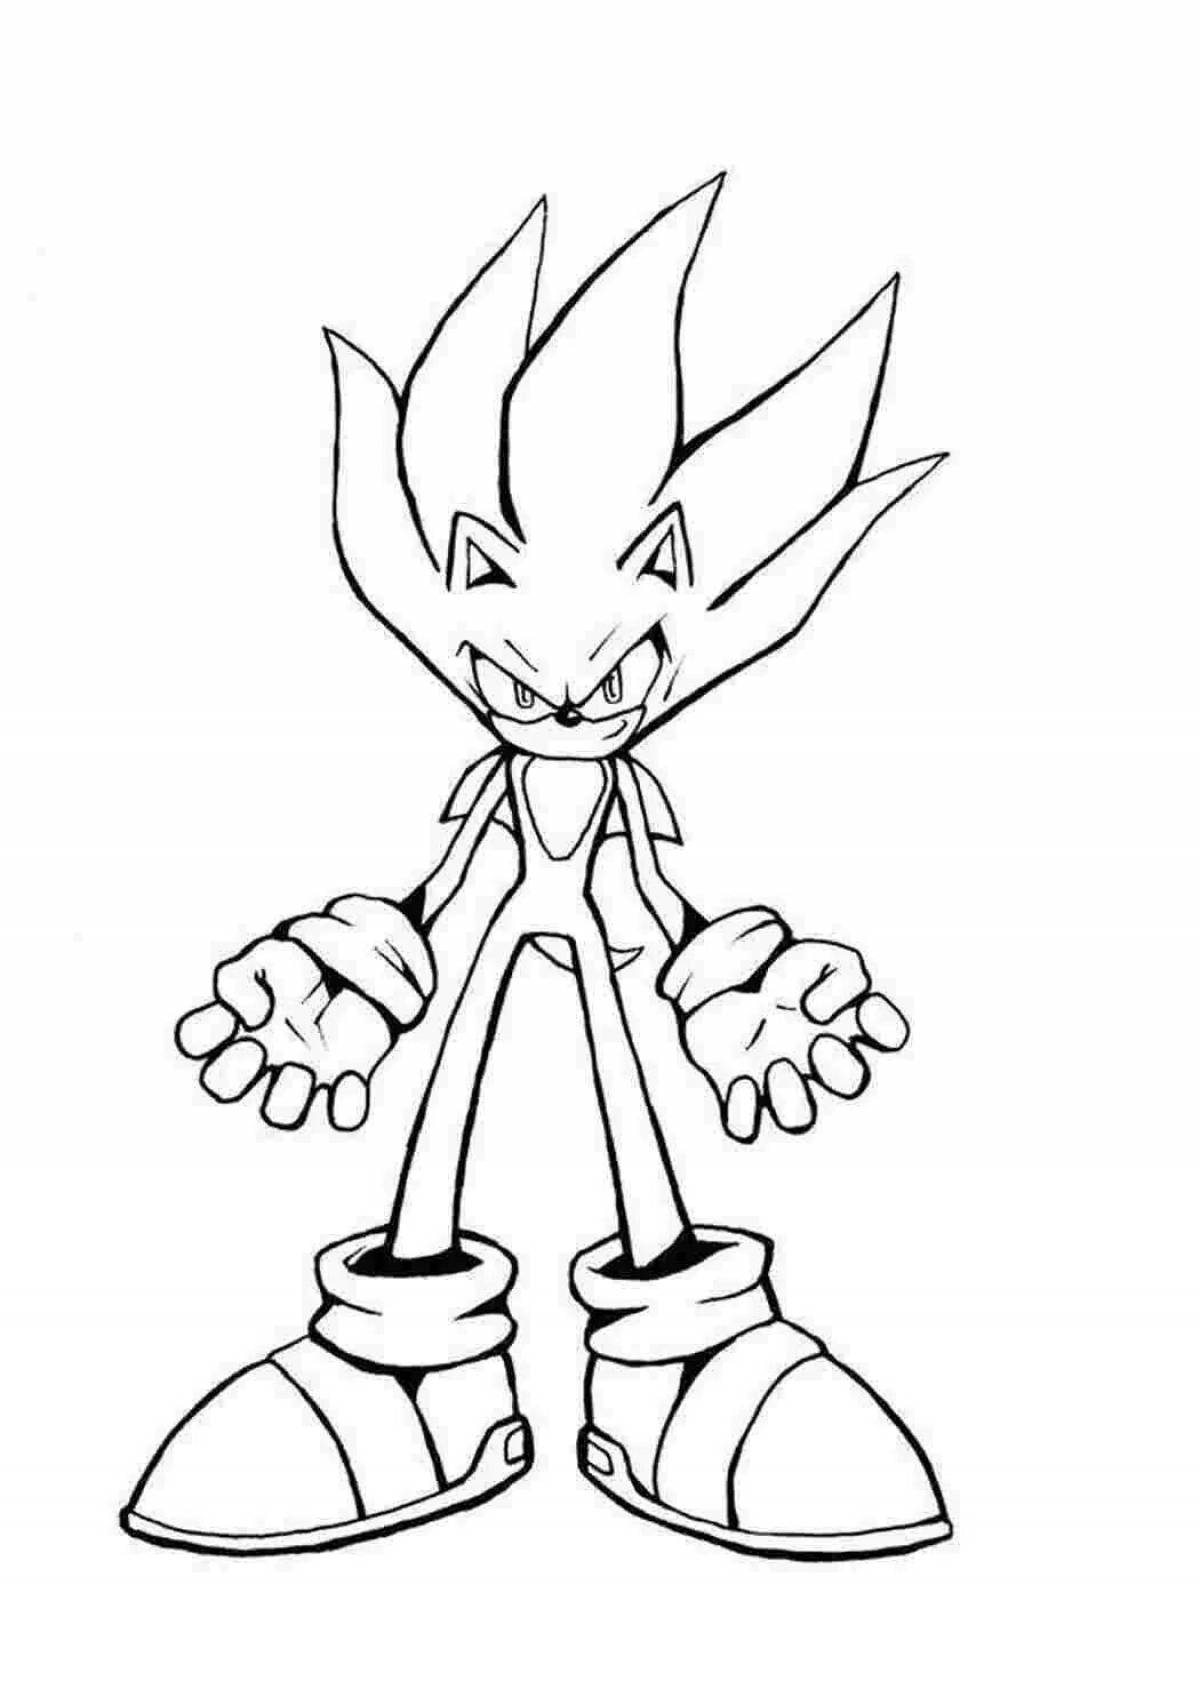 Intriguing hyper sonic coloring page